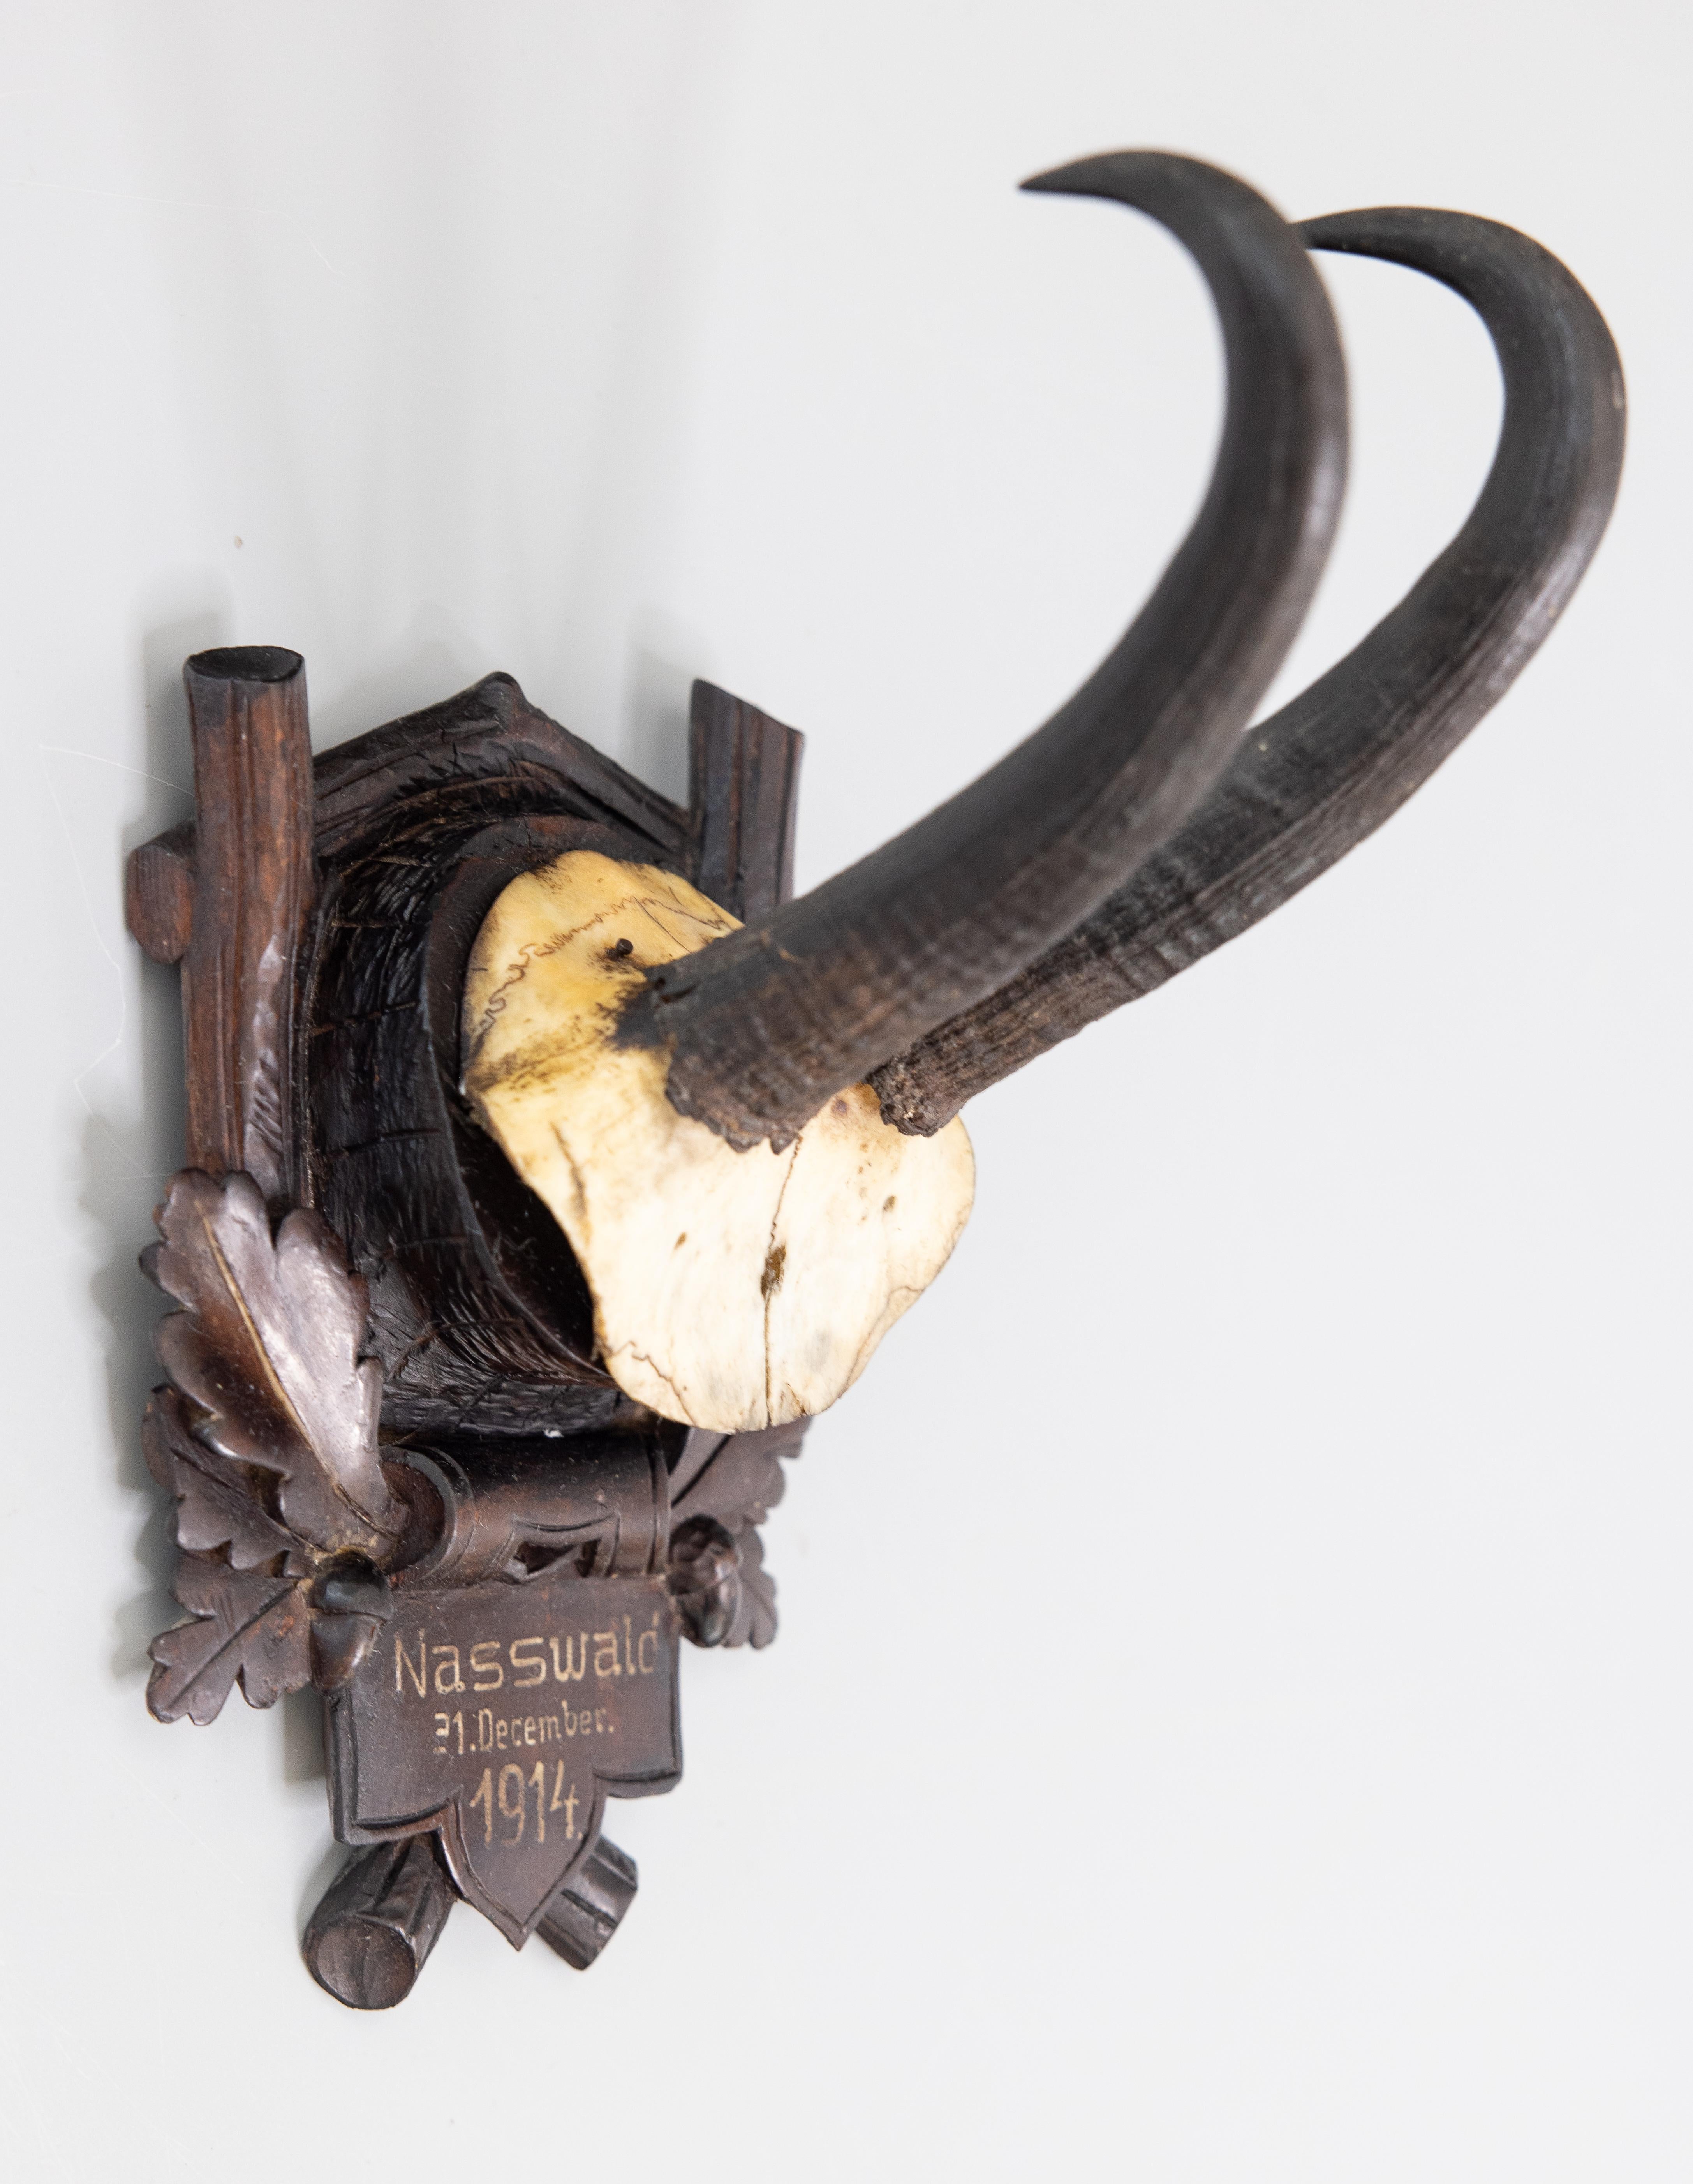 A fine antique chamois antler horns hunting trophy on a hand carved black forest plaque, dated December 21, 1914. The plaque is hand carved with oak leaves and acorns and was found in an old hunting lodge in Germany. It's perfect for a study and